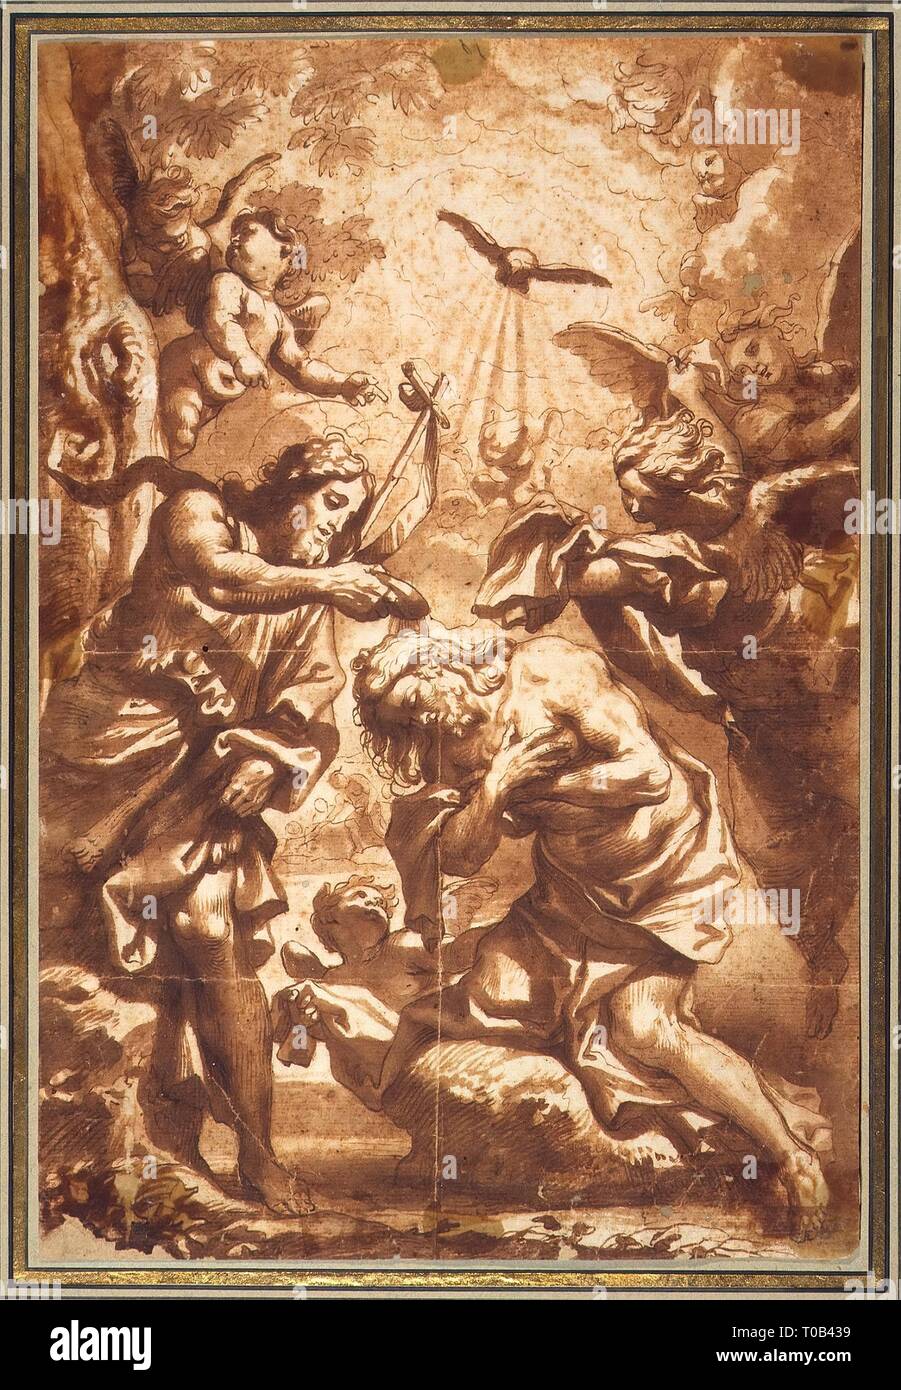 'Baptism of Christ'. Italy, 1670s. Dimensions: 28,6x19,2 cm. Museum: State Hermitage, St. Petersburg. Author: Domenico Piola I. Stock Photo